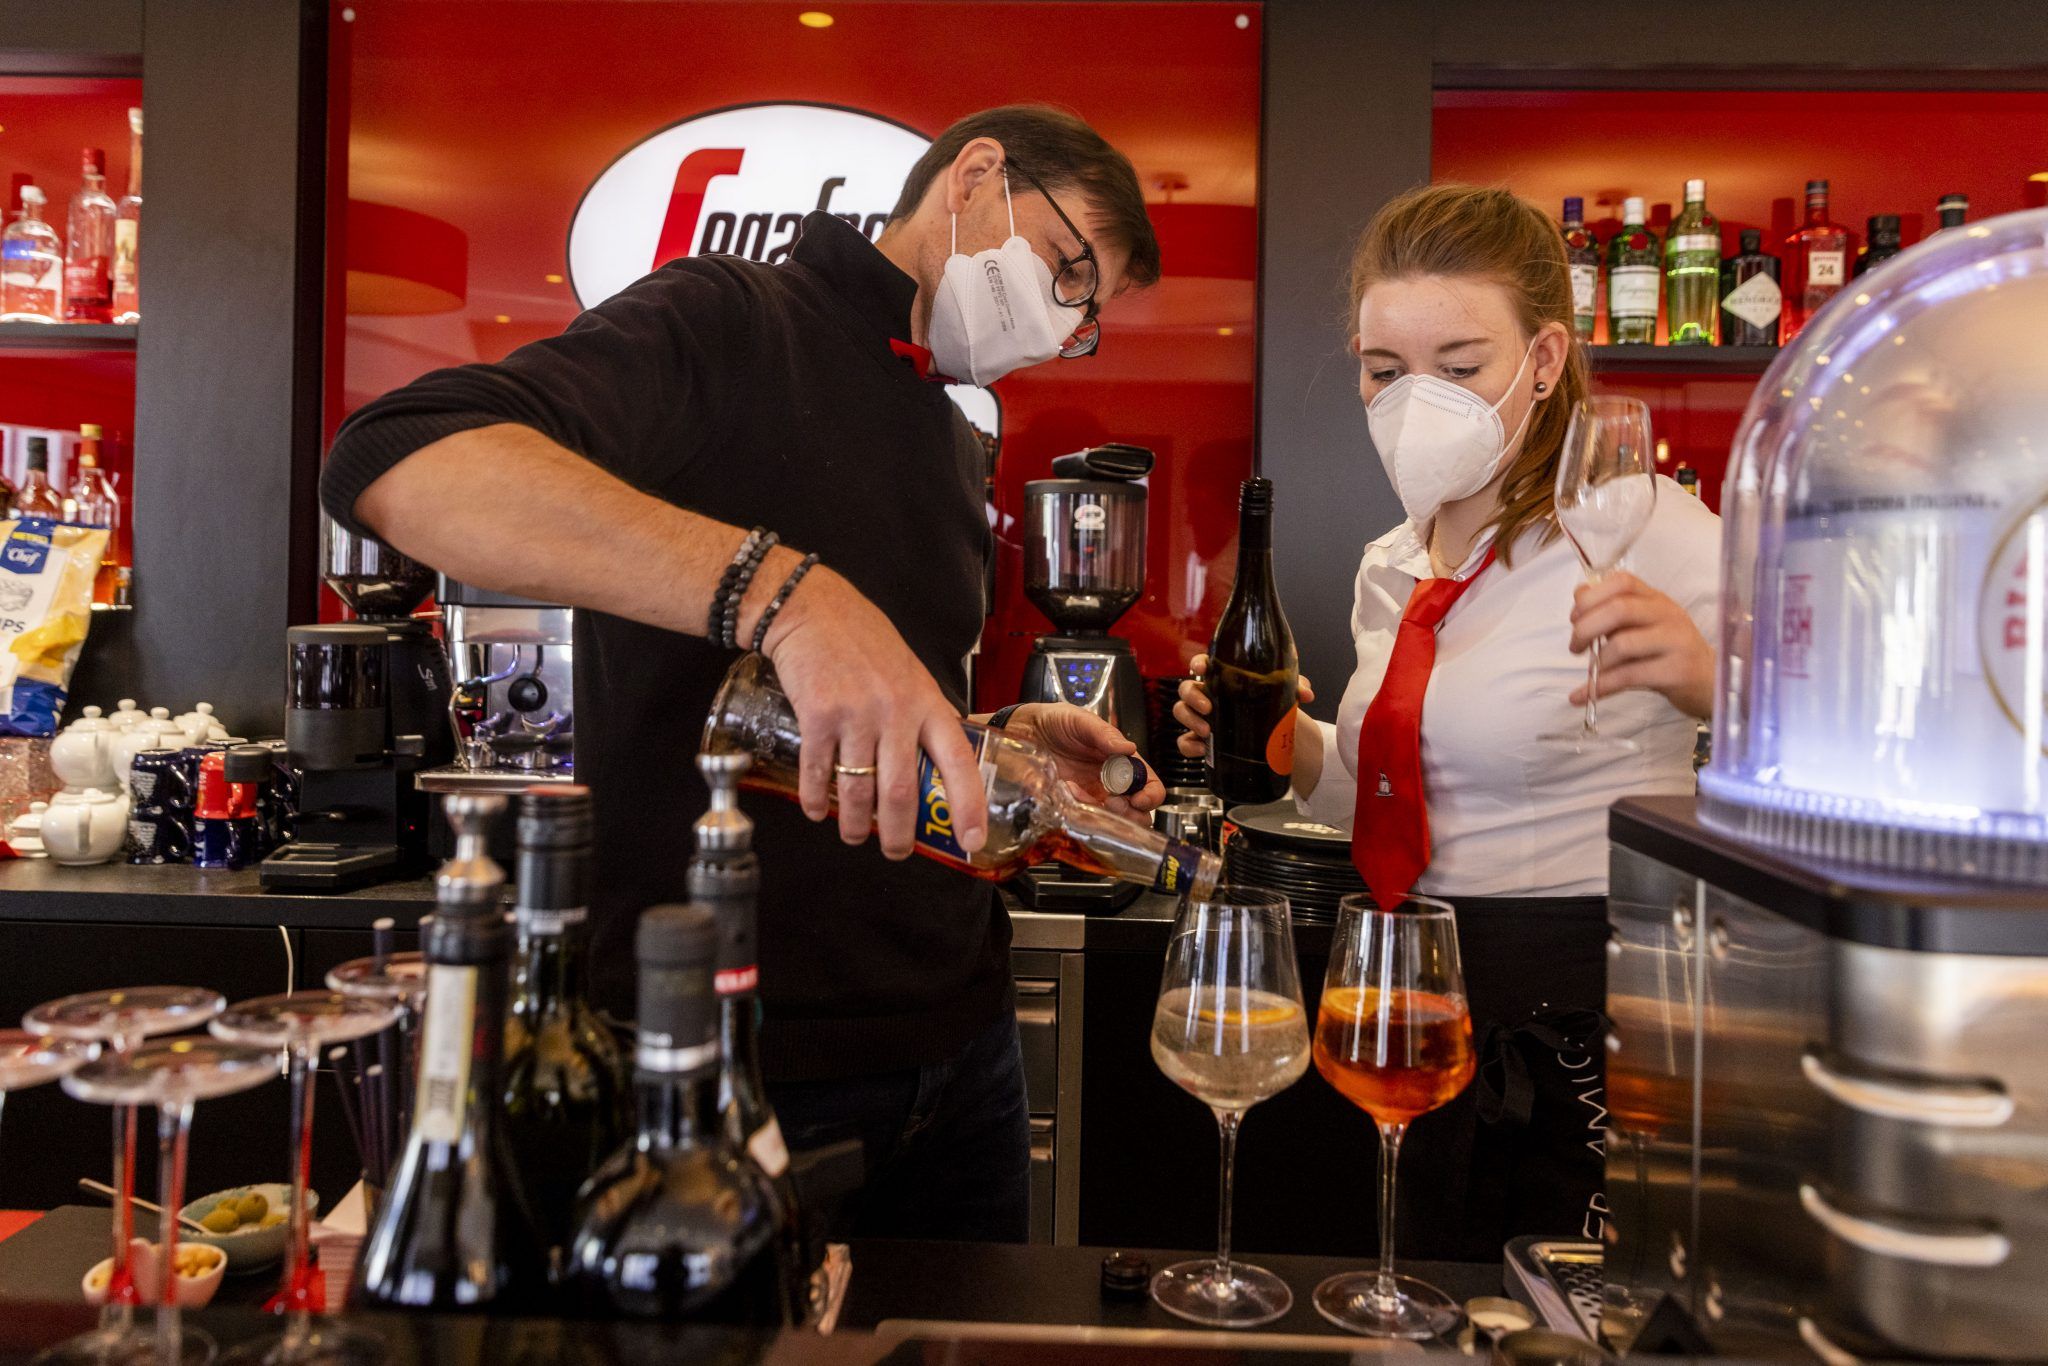 Cafes and bars in Austria have to close at midnight [Photo: Getty]